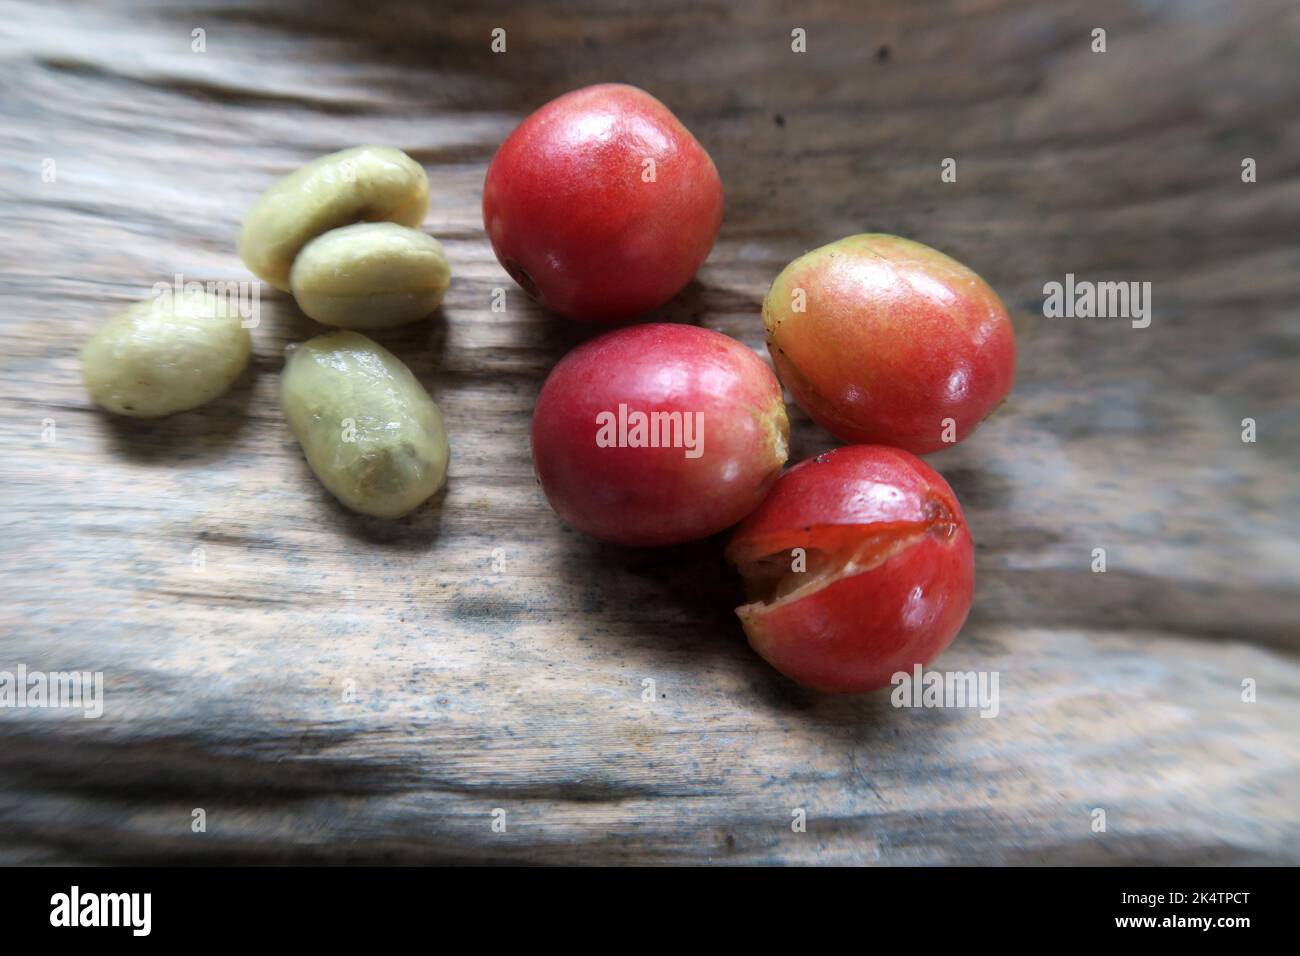 Still life of typica arabica coffee cherries and beans, Chiang Rai, Thailand Stock Photo